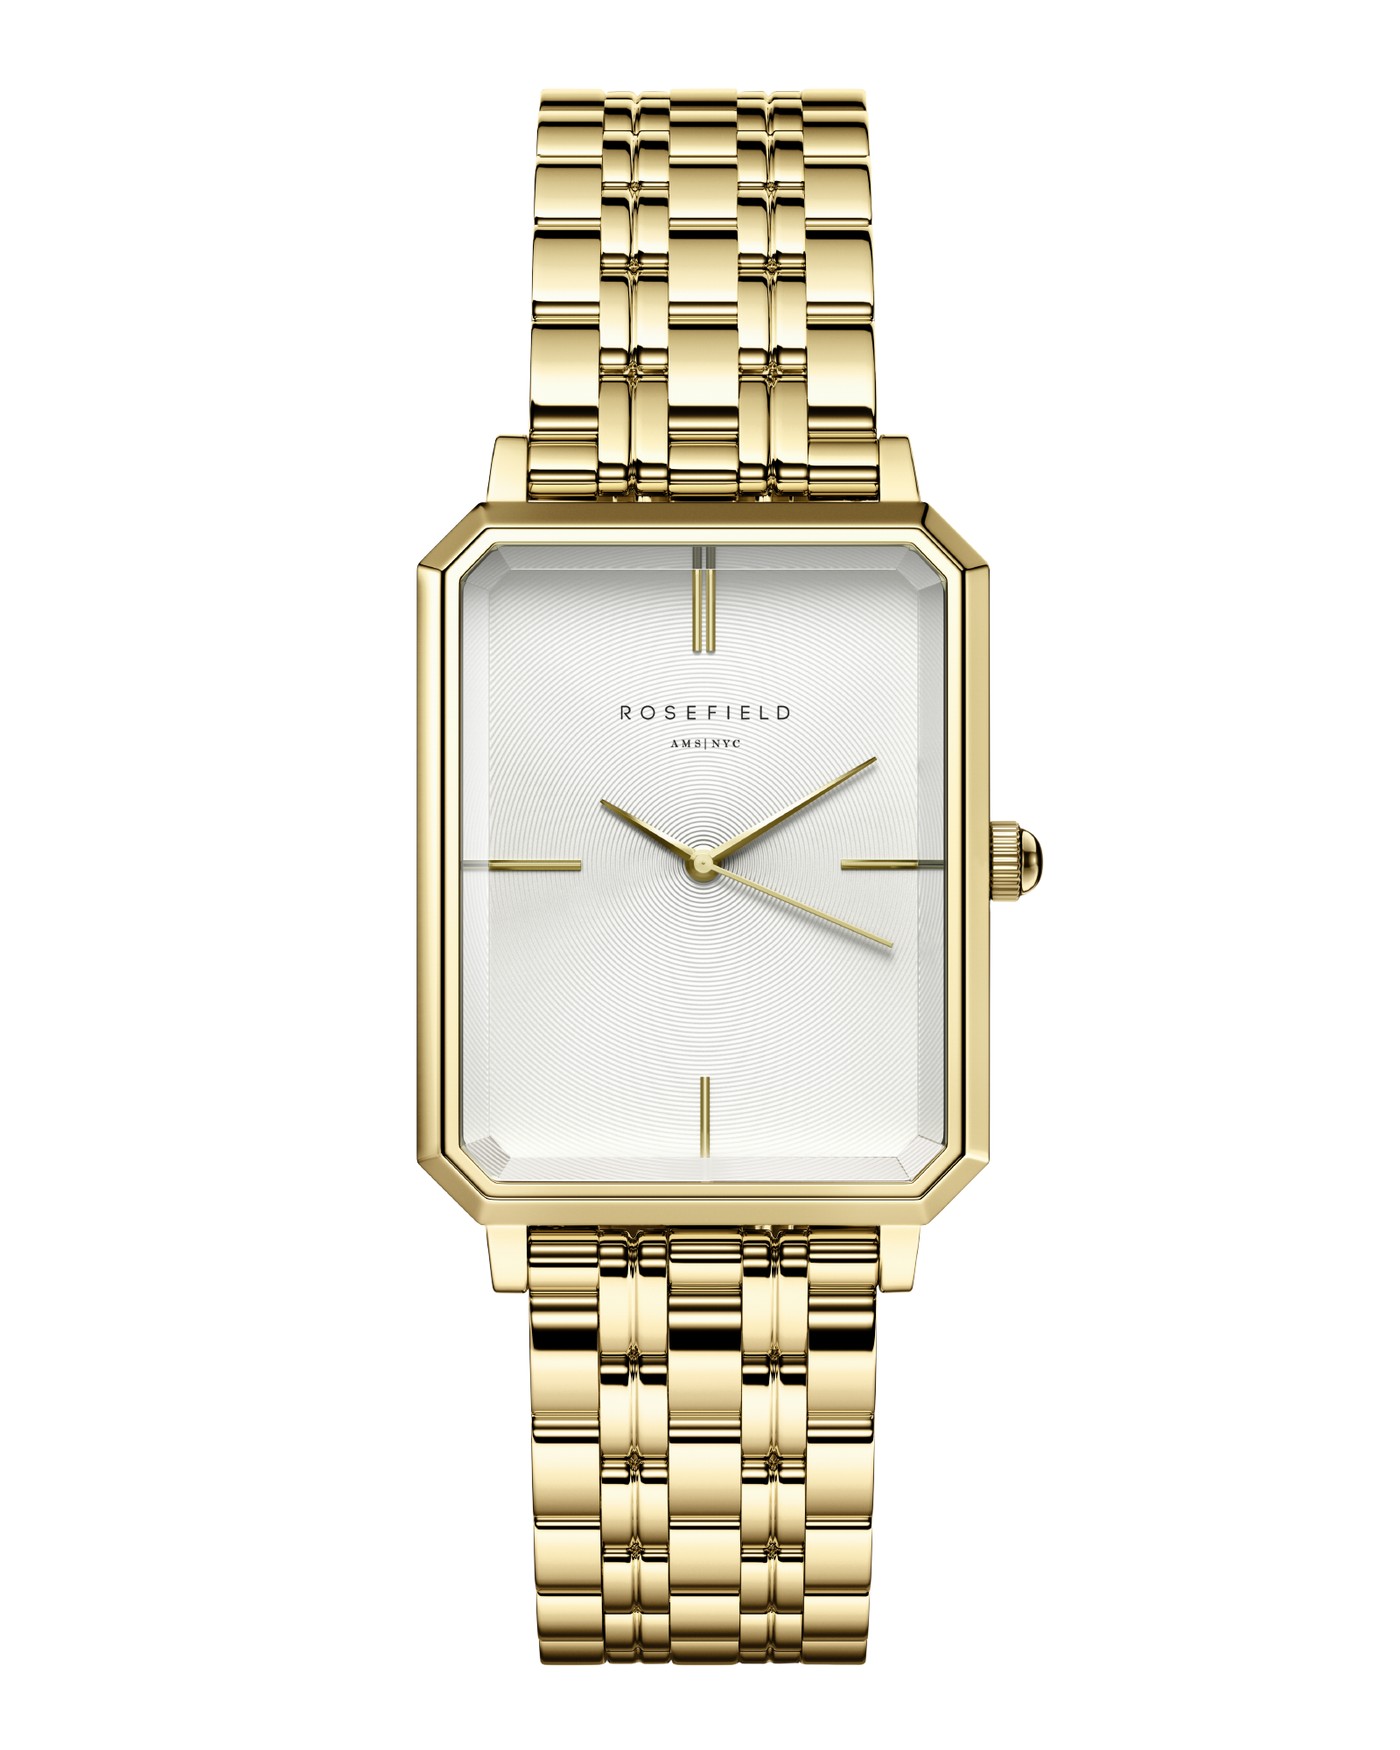 The Octagon is Rosefield's newest collection of modern watches – an instant classic. The rare octagonal face shape and polished 5-link bracelet recall 1920s elegance, redefining the watch as fashion accessory.      23K gold-plated Stainless steel - Gold     Water resistance 3 ATM